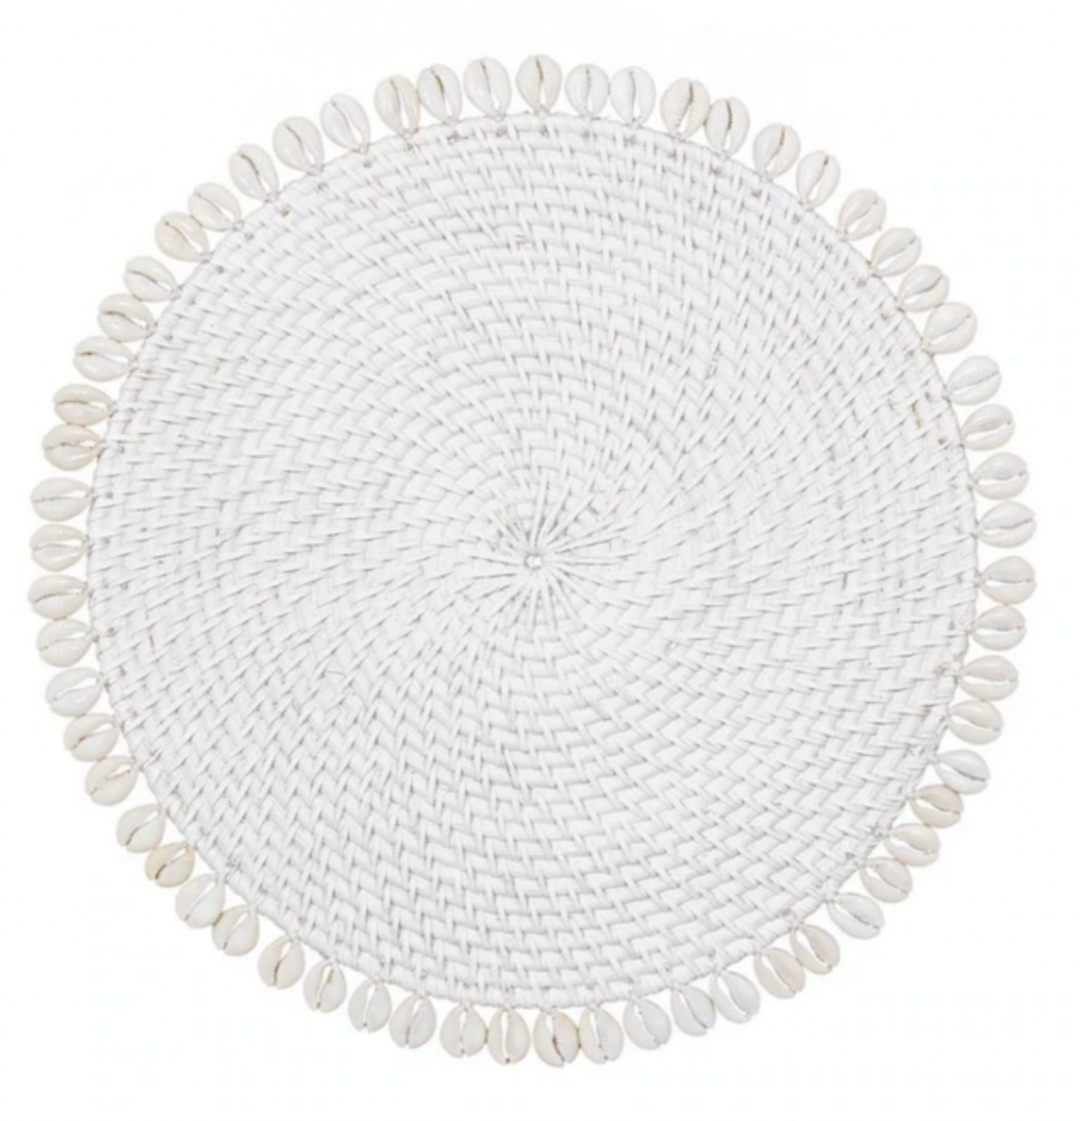 Rattan Placemat with Cowrie Shell - Set of 4